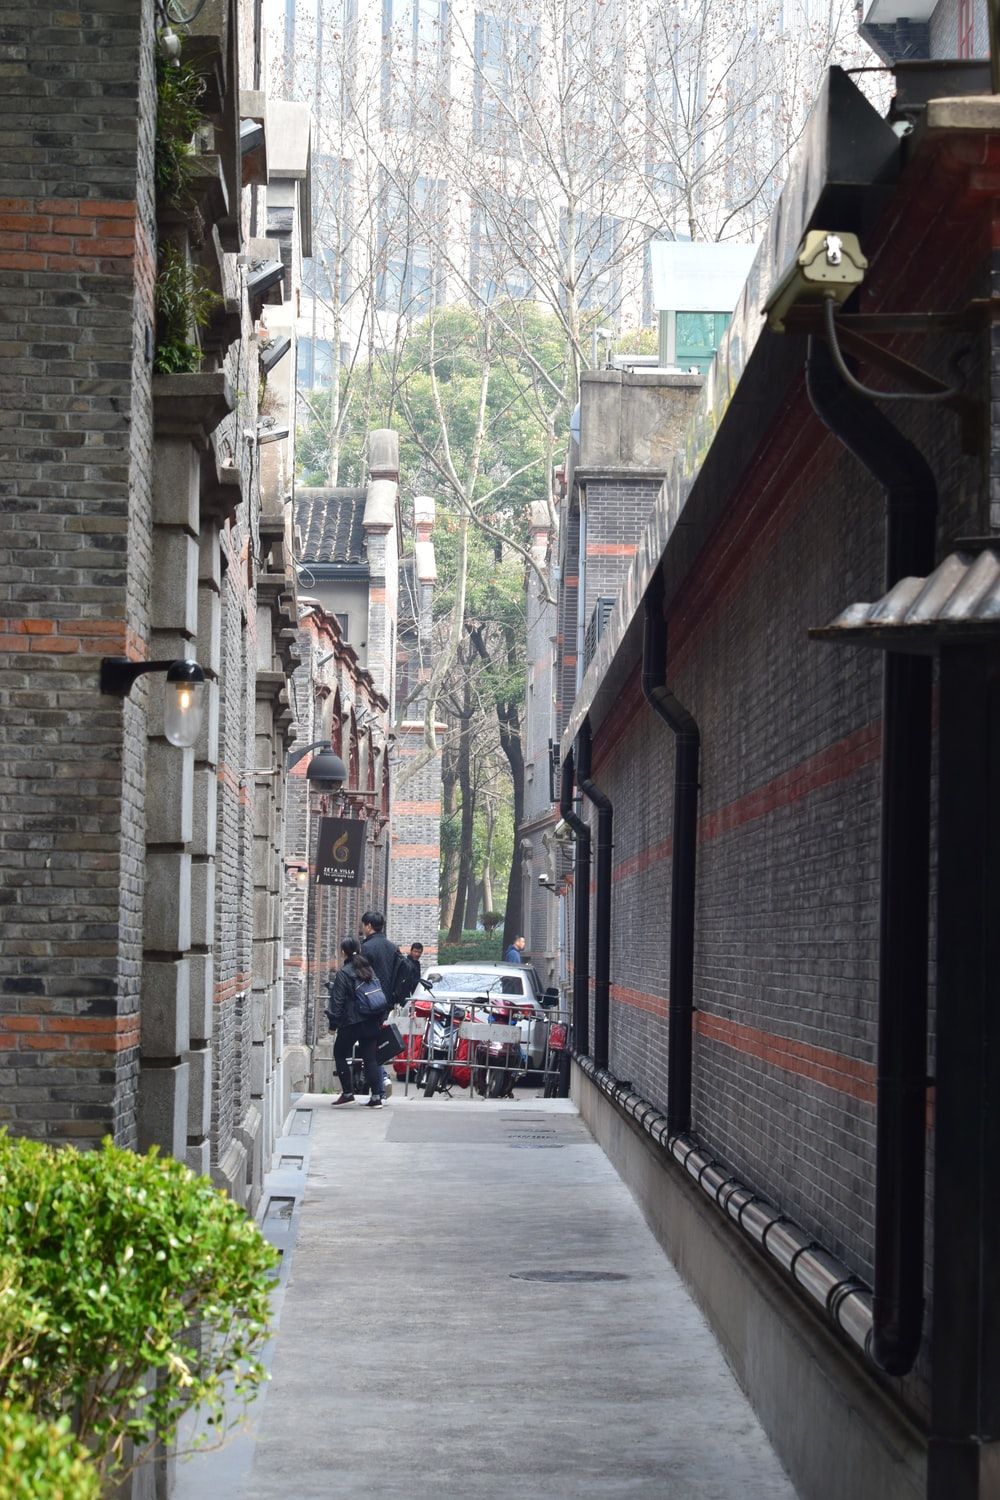 China Street Picture. Download Free Image